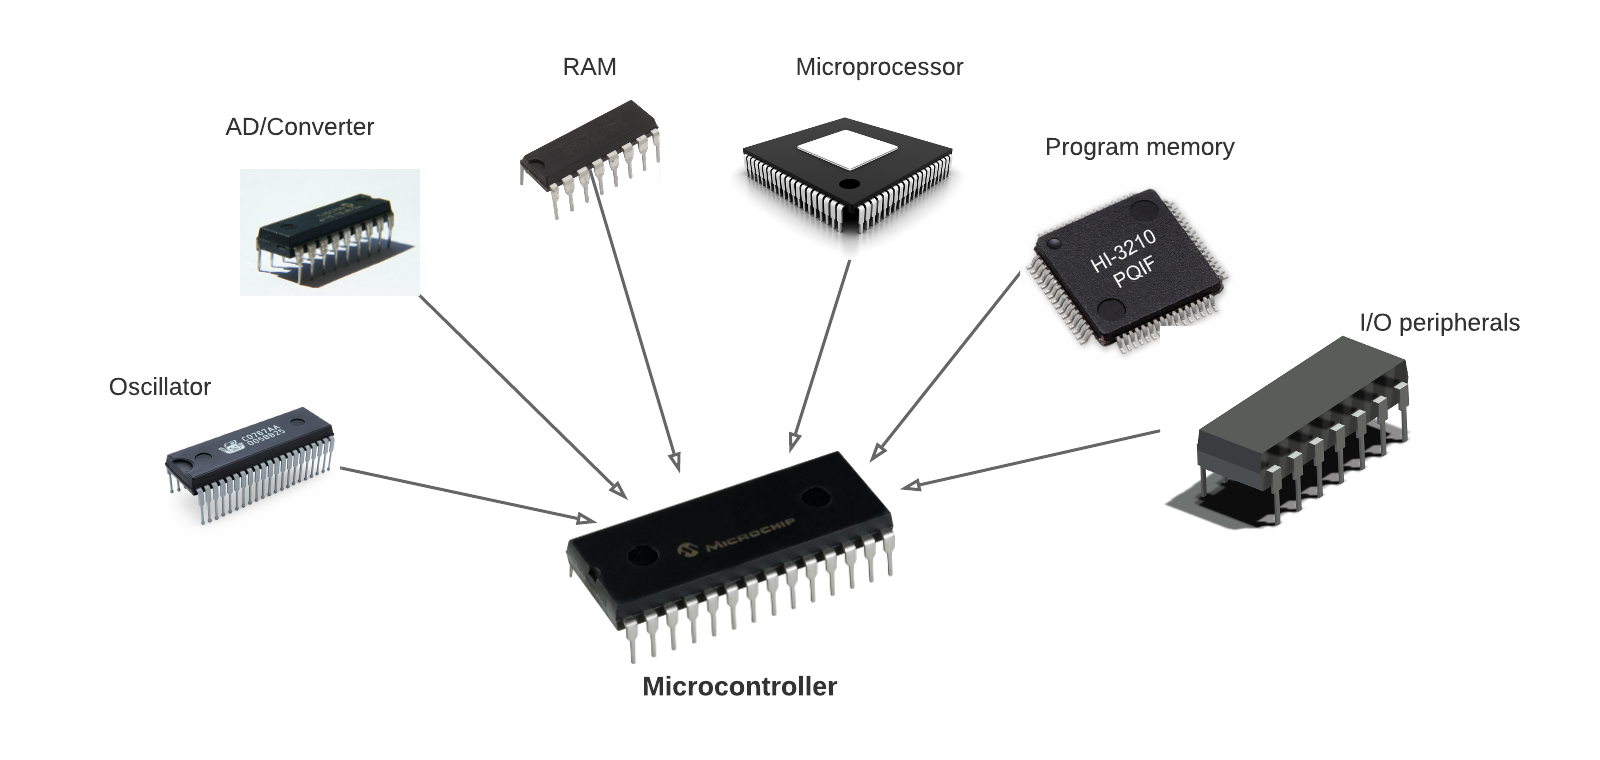 https://www.circuitbasics.com/introduction-to-microcontrolleres/